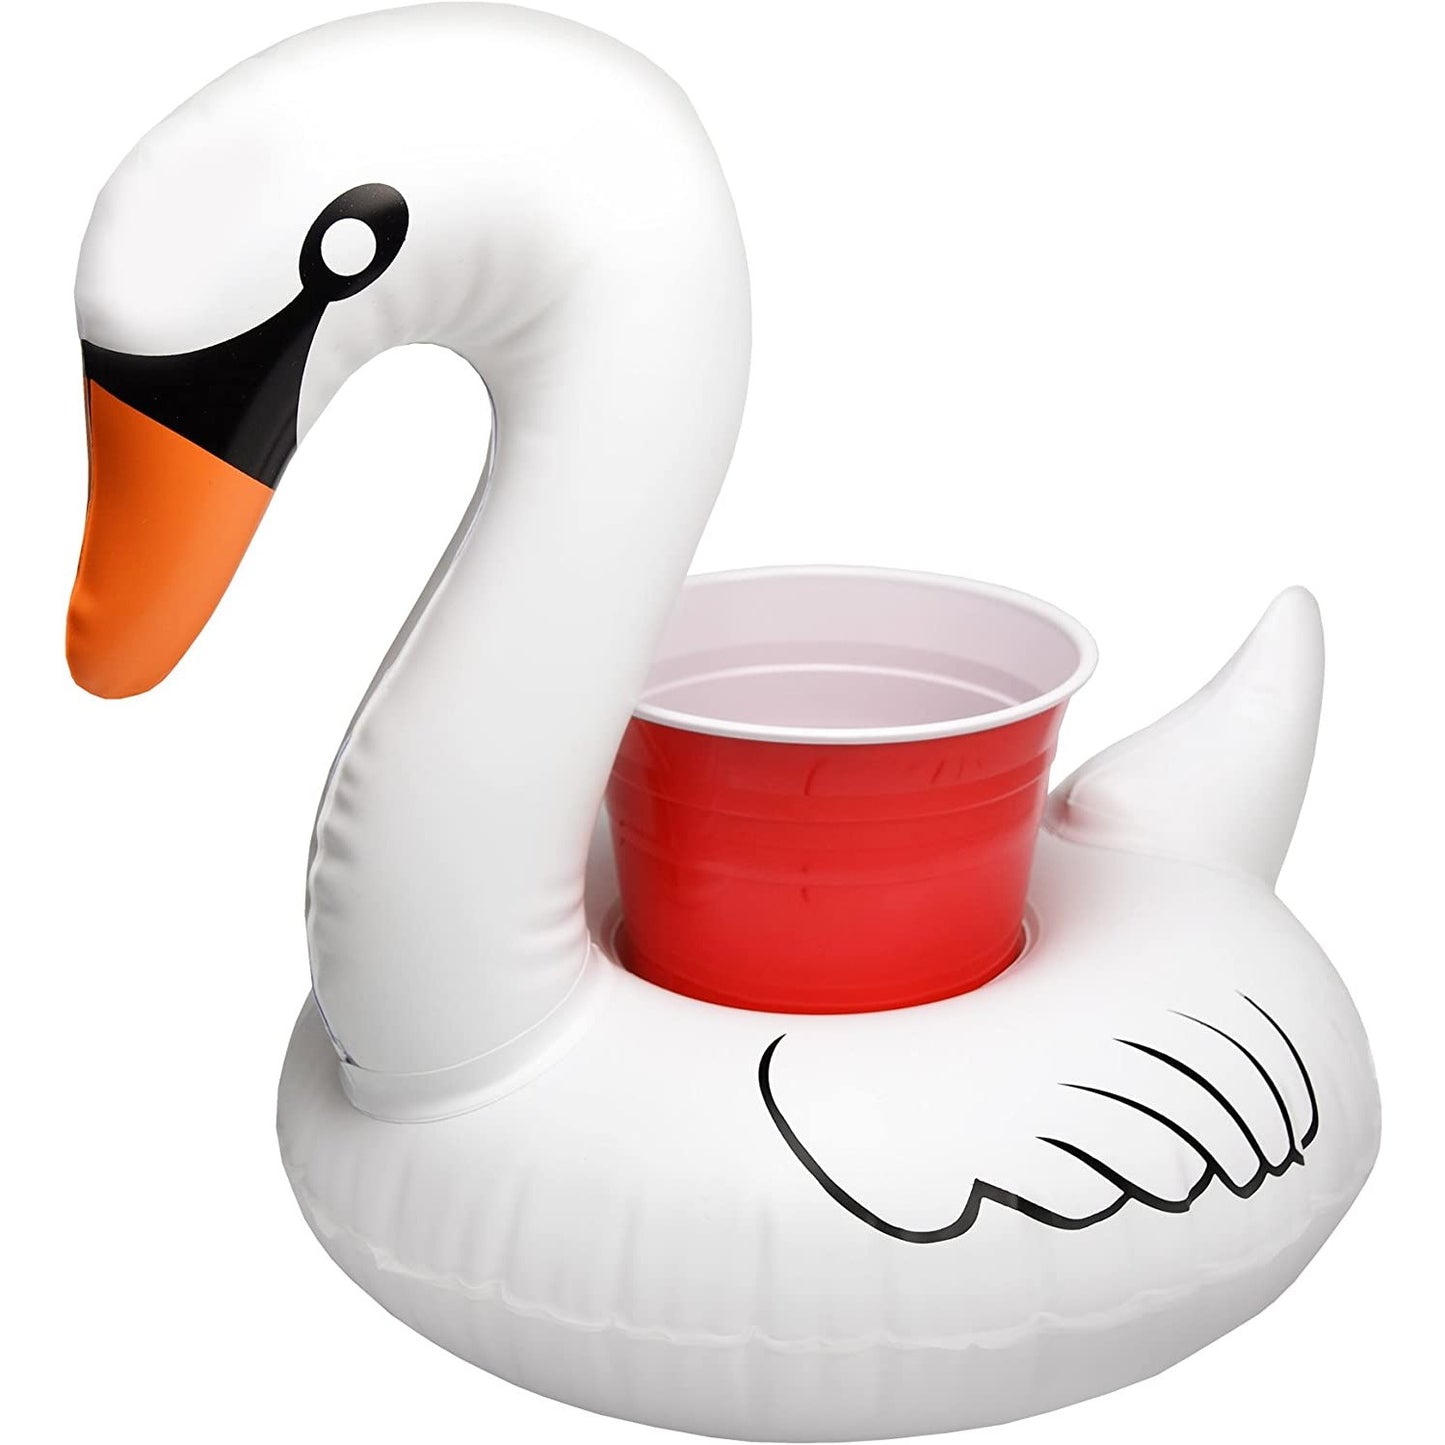 A white swan shaped drink holding pool float with a red cup in the holder.